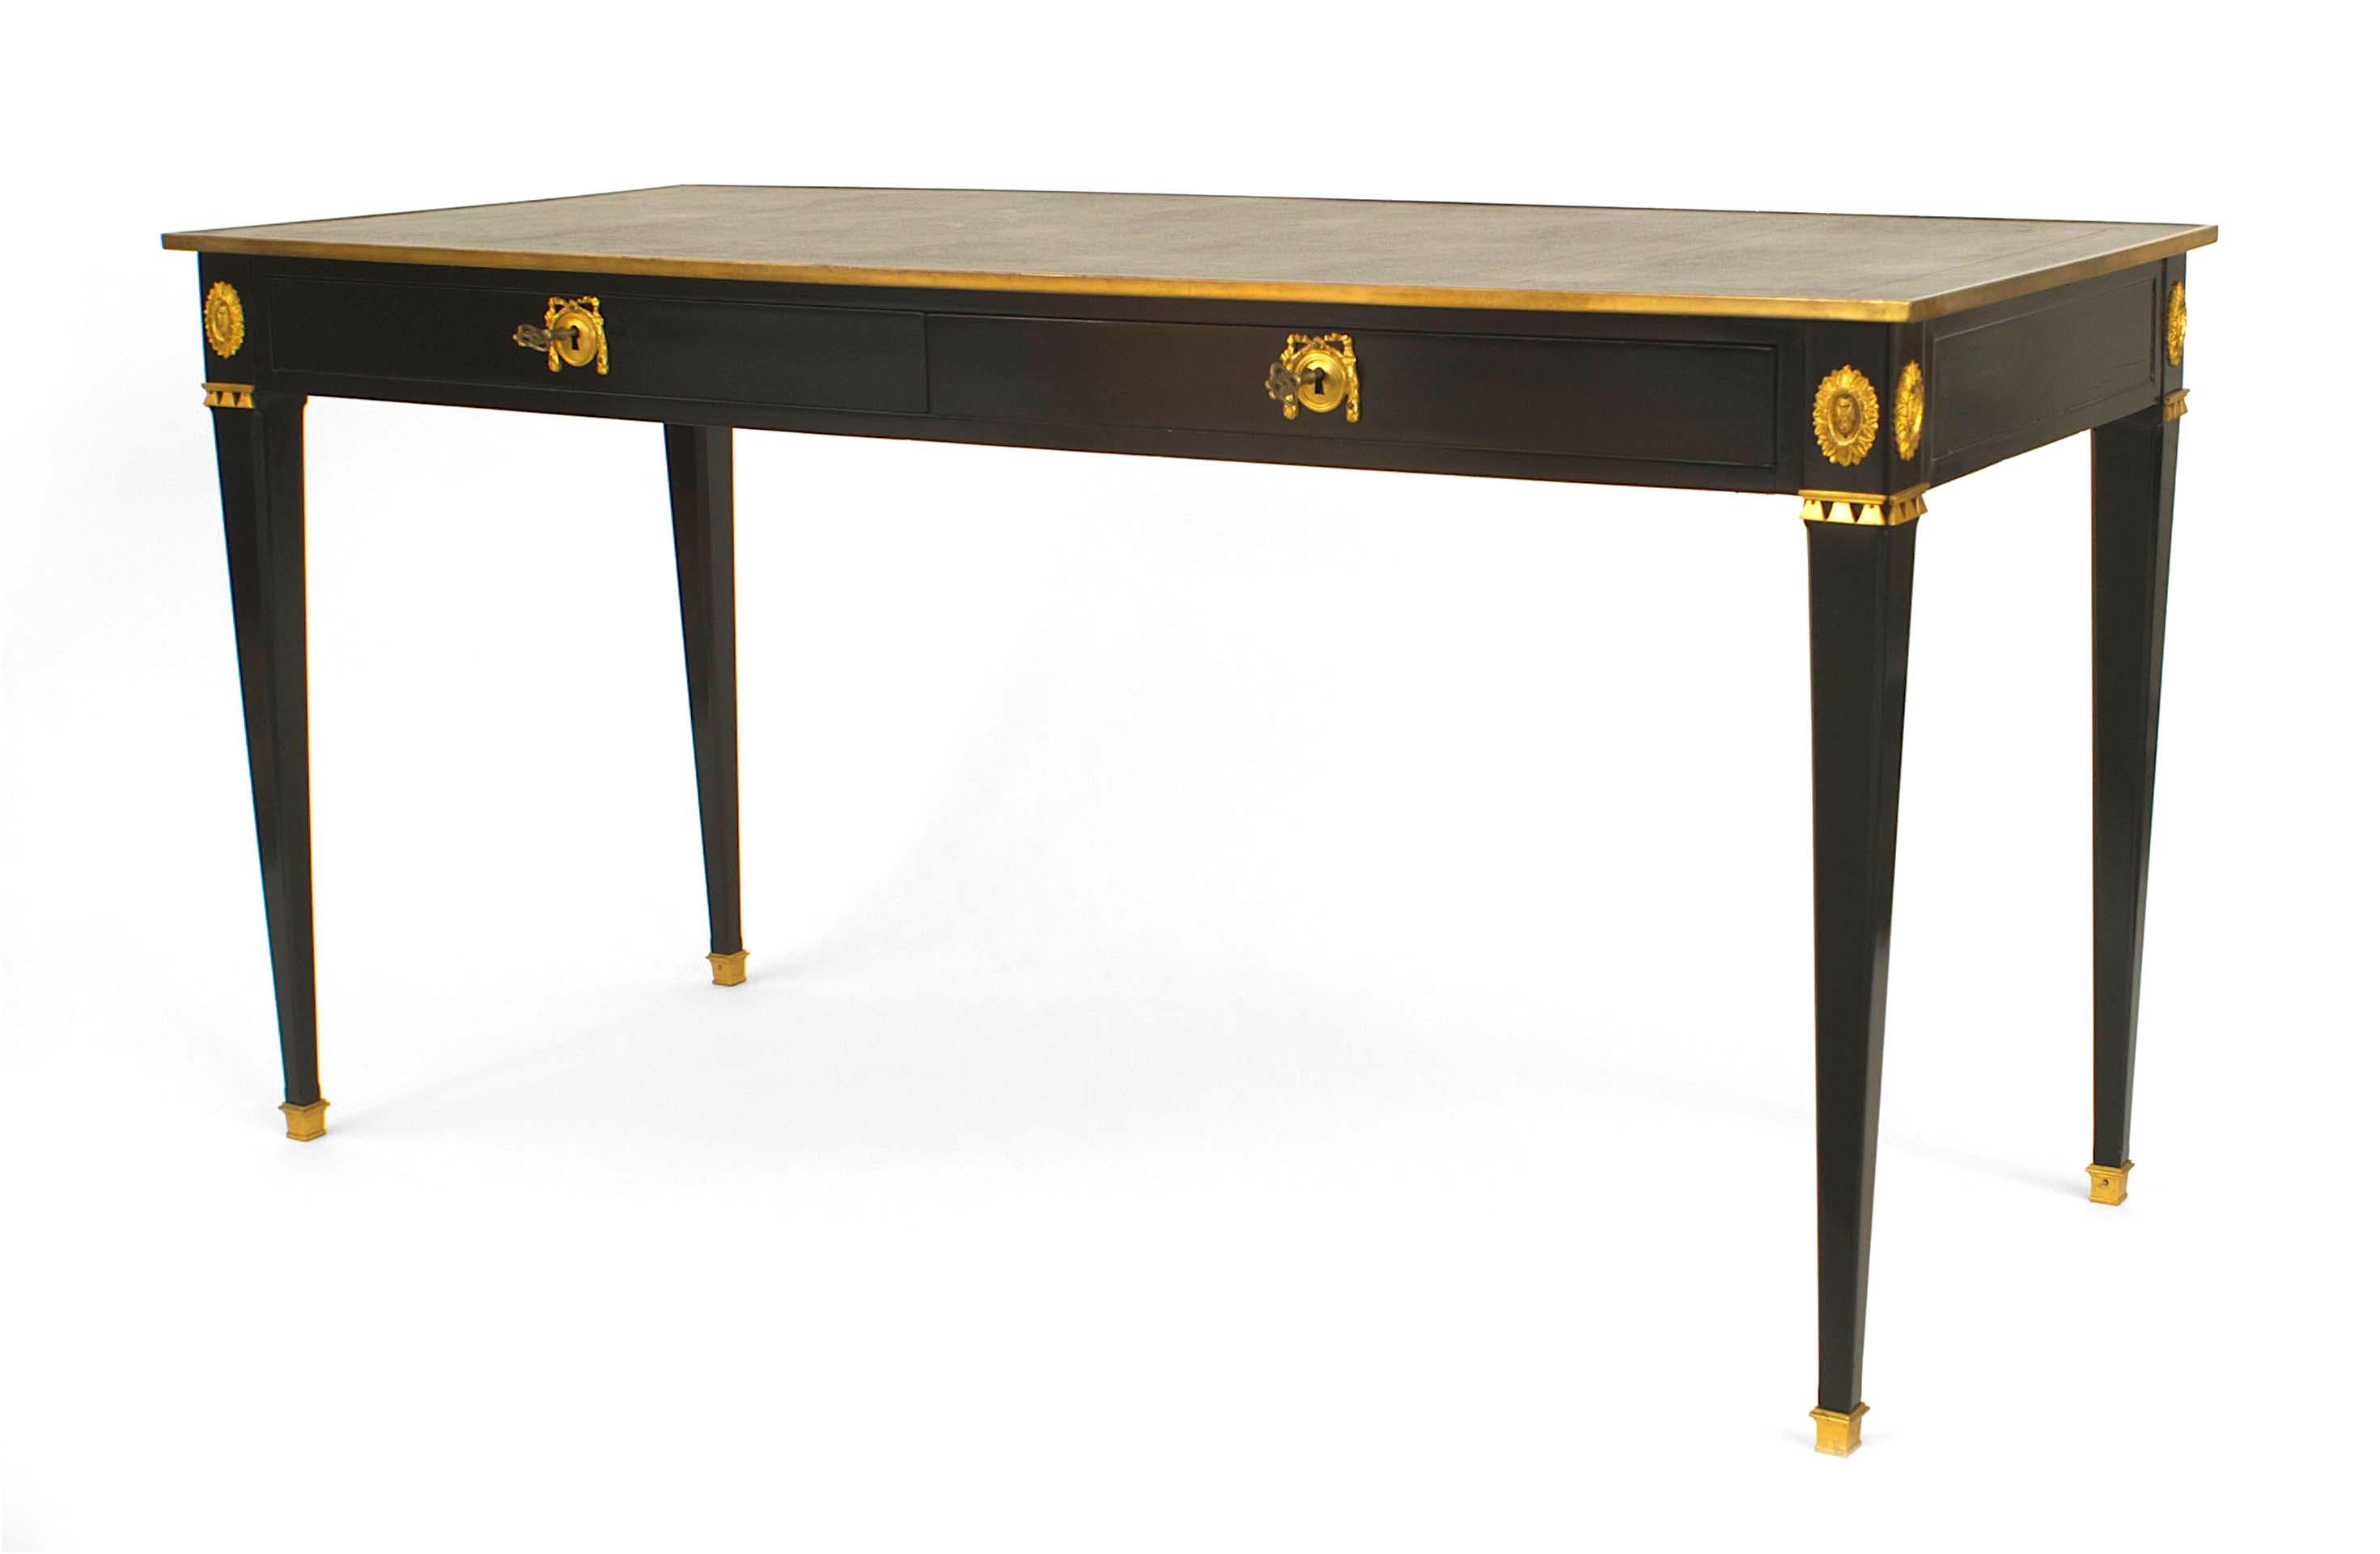 French 1940s ebonized and rectangular table desk with bronze edge and trim having two drawers over a black leather top (stamped: JANSEN).

Maison Jansen was a Paris-based interior decoration office founded in 1880 by Dutch-born Jean-Henri Jansen.